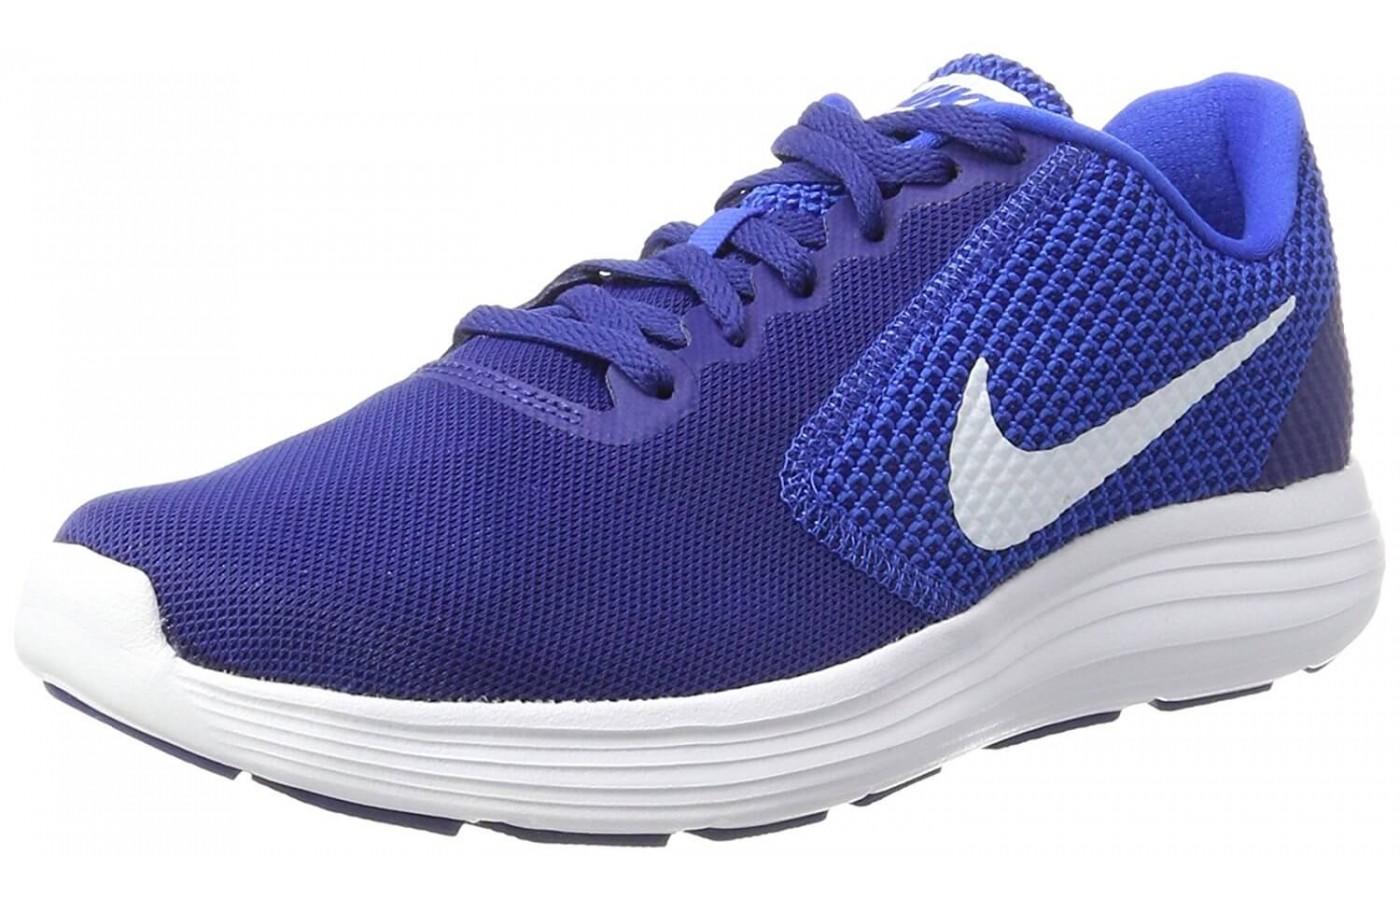 The Nike Revolution 3 features Phylon midsole cushioning